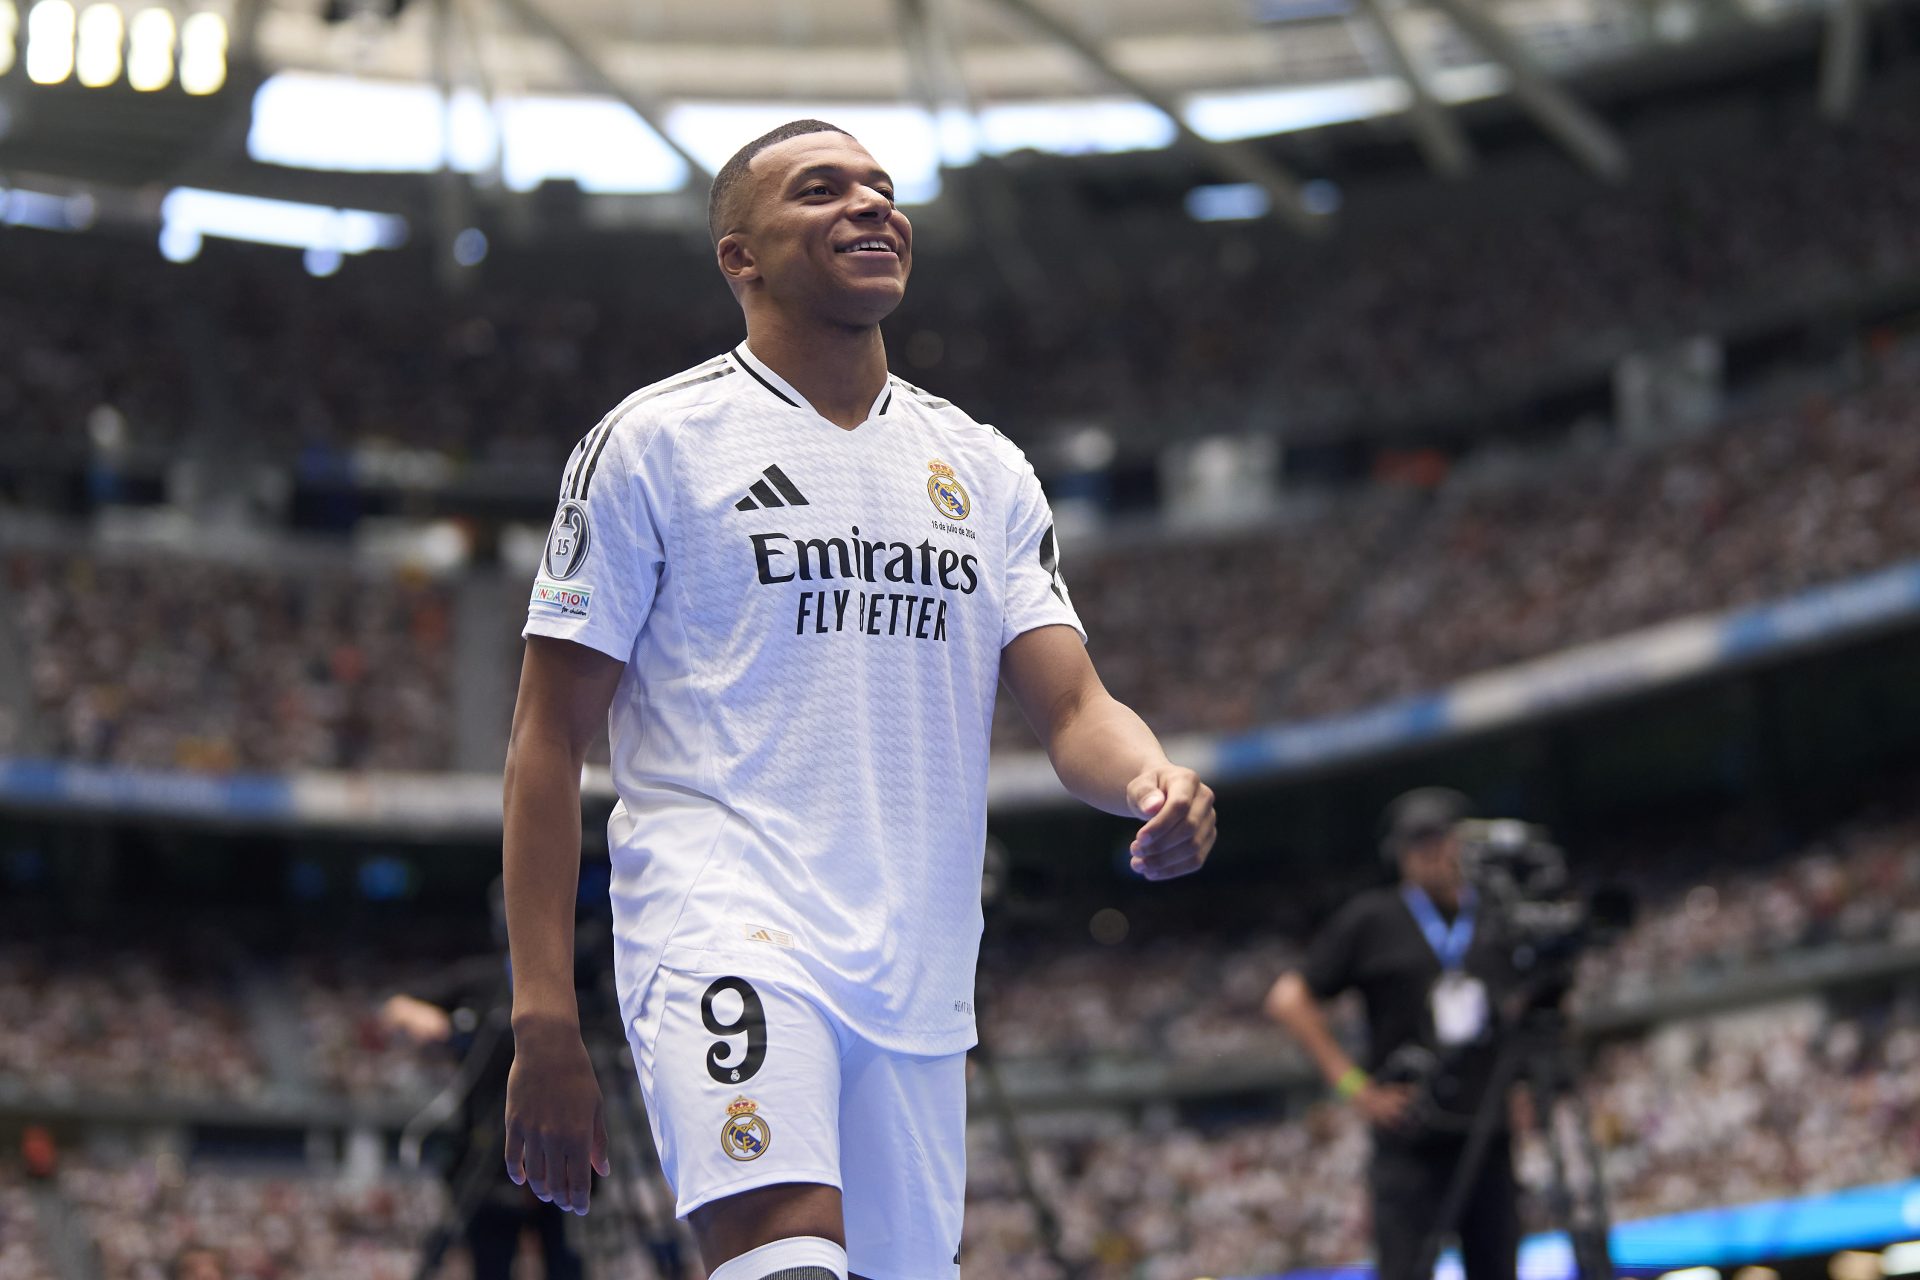 The best moments of Kylian Mbappe's unveiling at Real Madrid